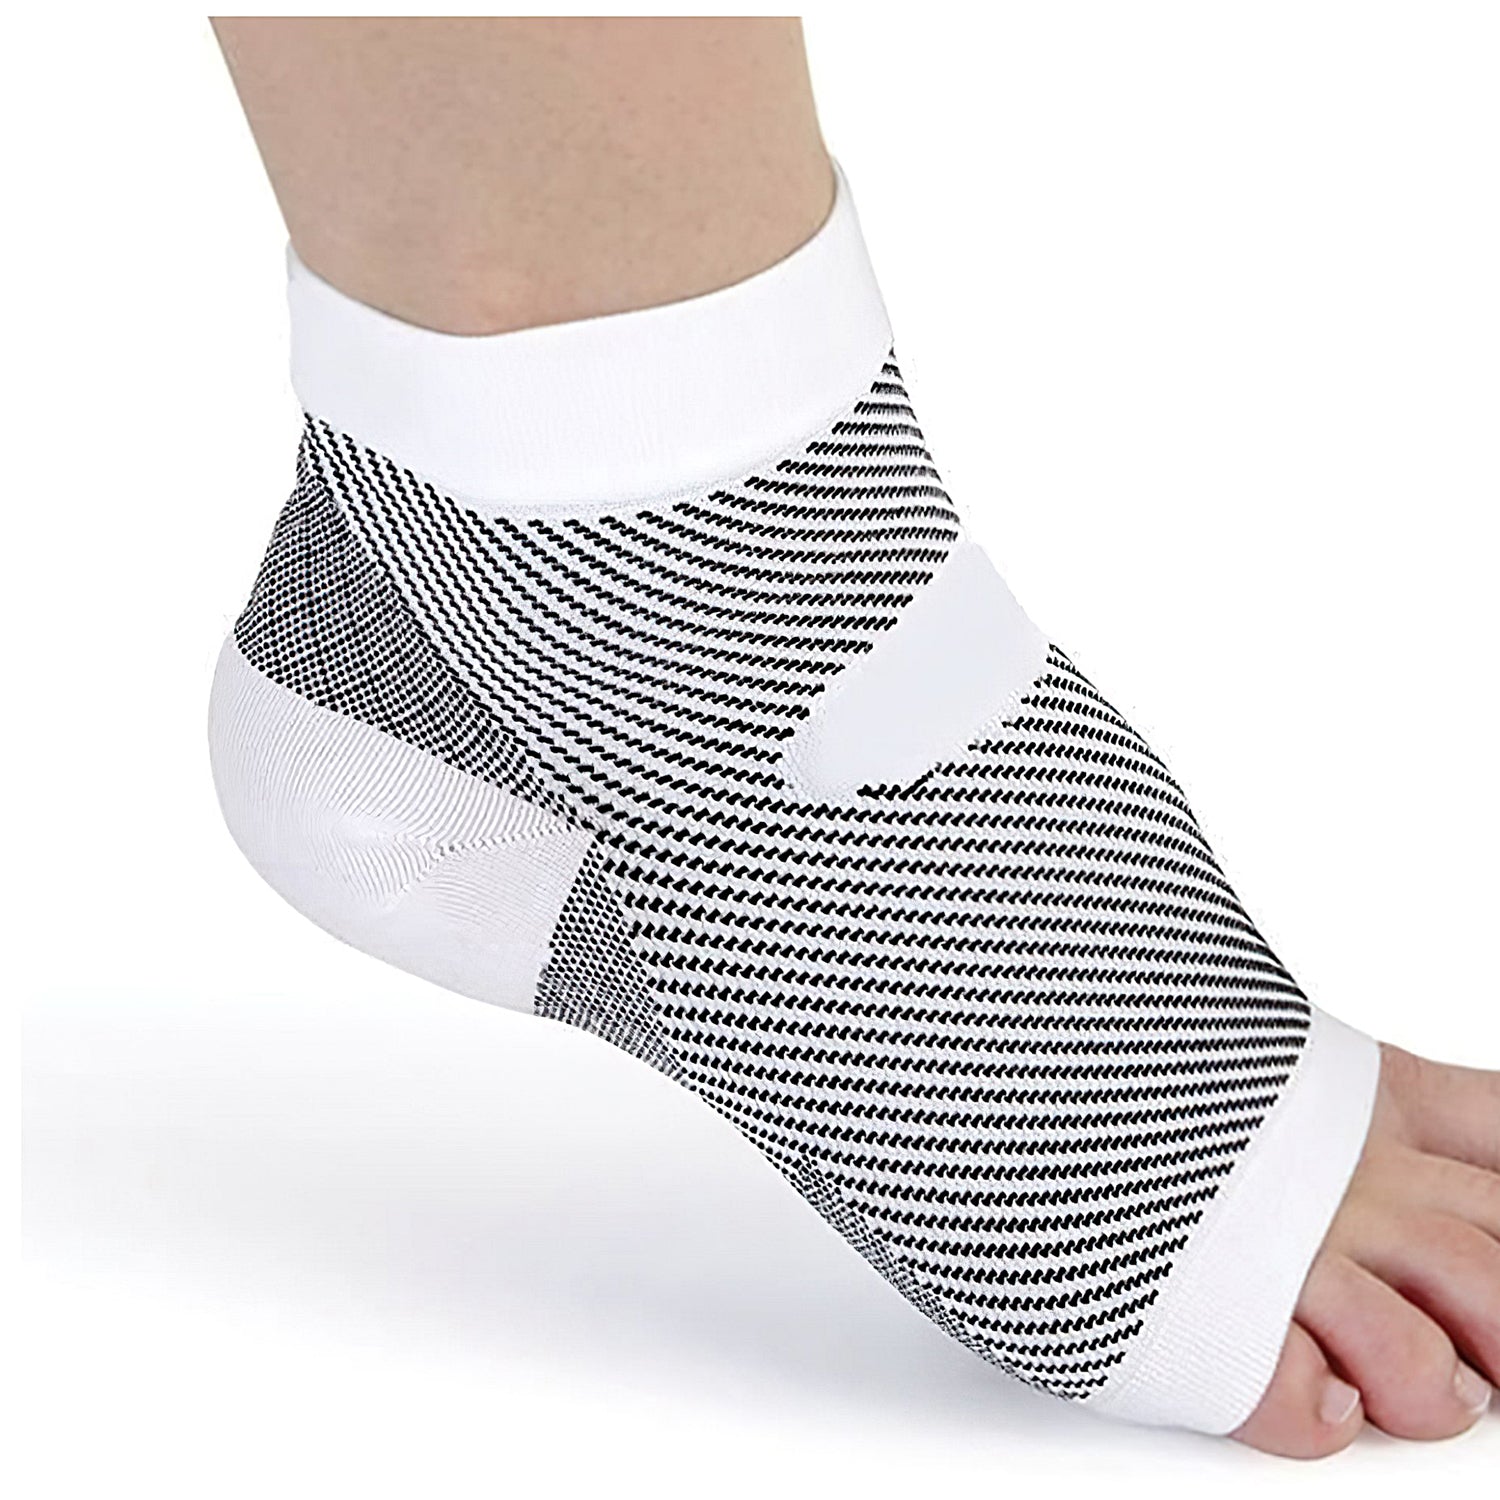 Toe Separator Socks by Stretch; Toe Spacer Foot Alignment Sock for Bun